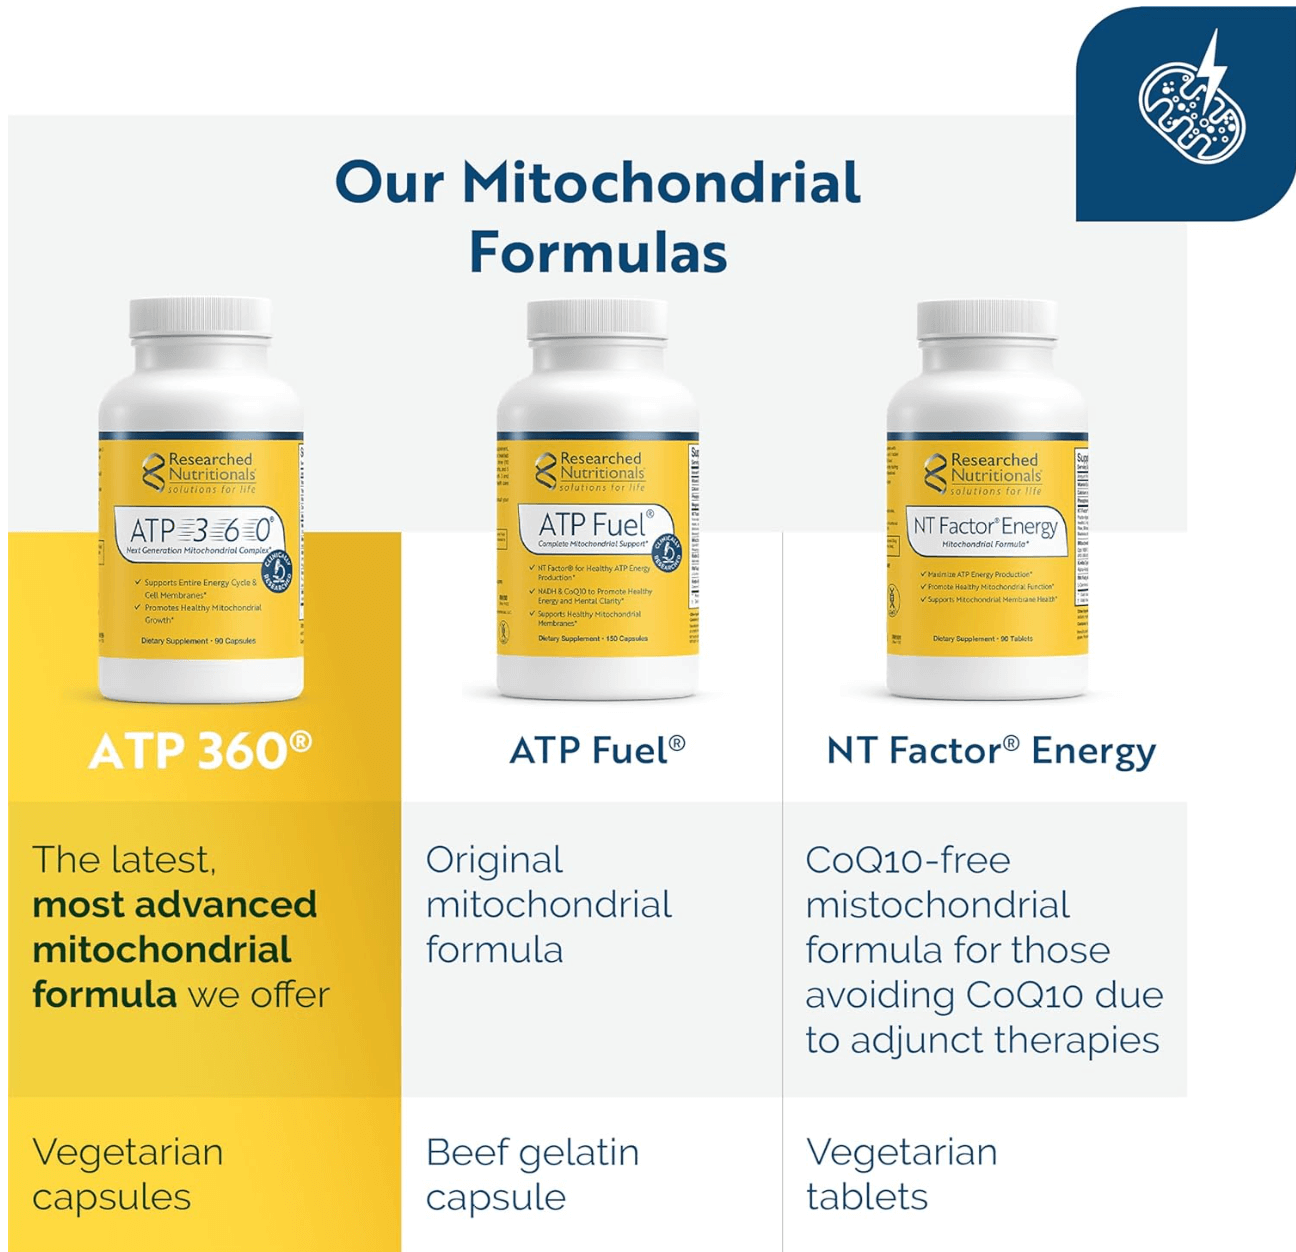 Researched Nutritionals ATP 360 Capsules